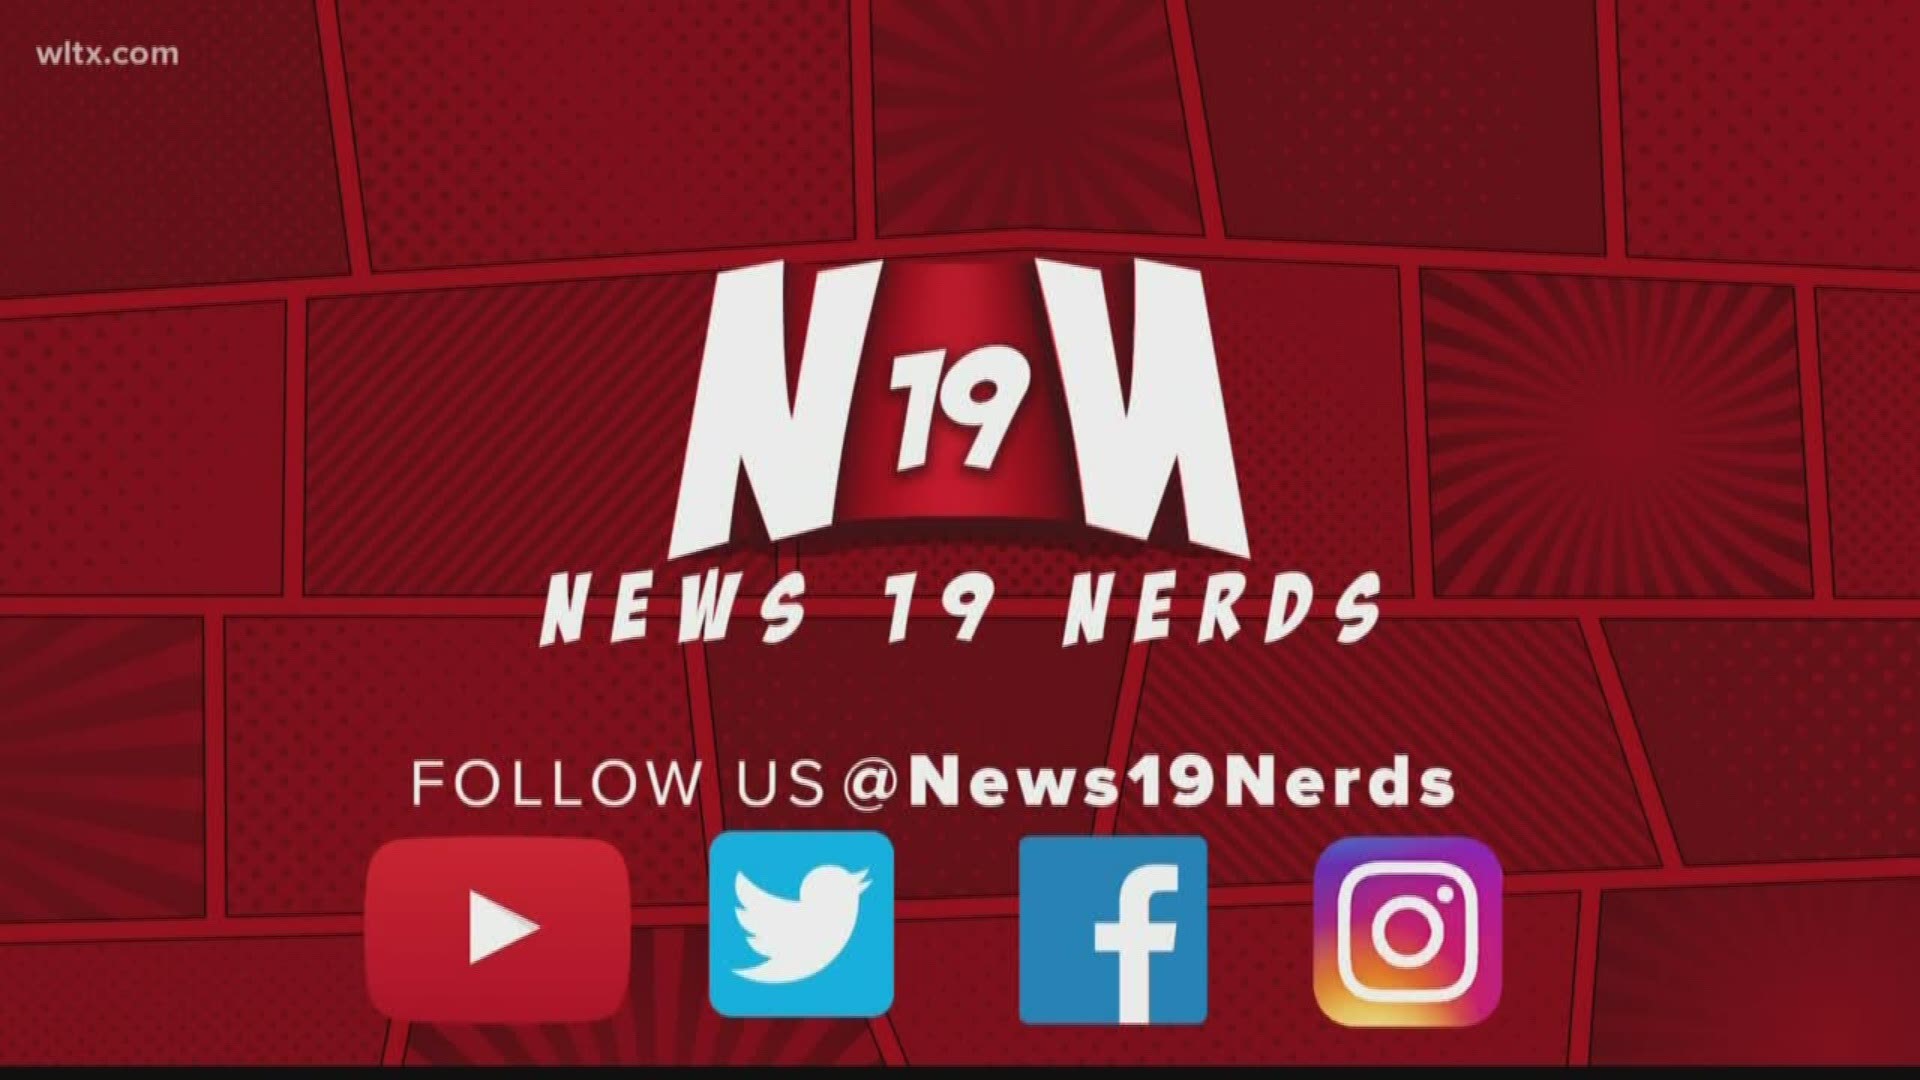 Michael Patterson and Loren Thomas from the News19 Nerds provide the latest entertainment, technology, and all other nerd news on January 31, 2020.